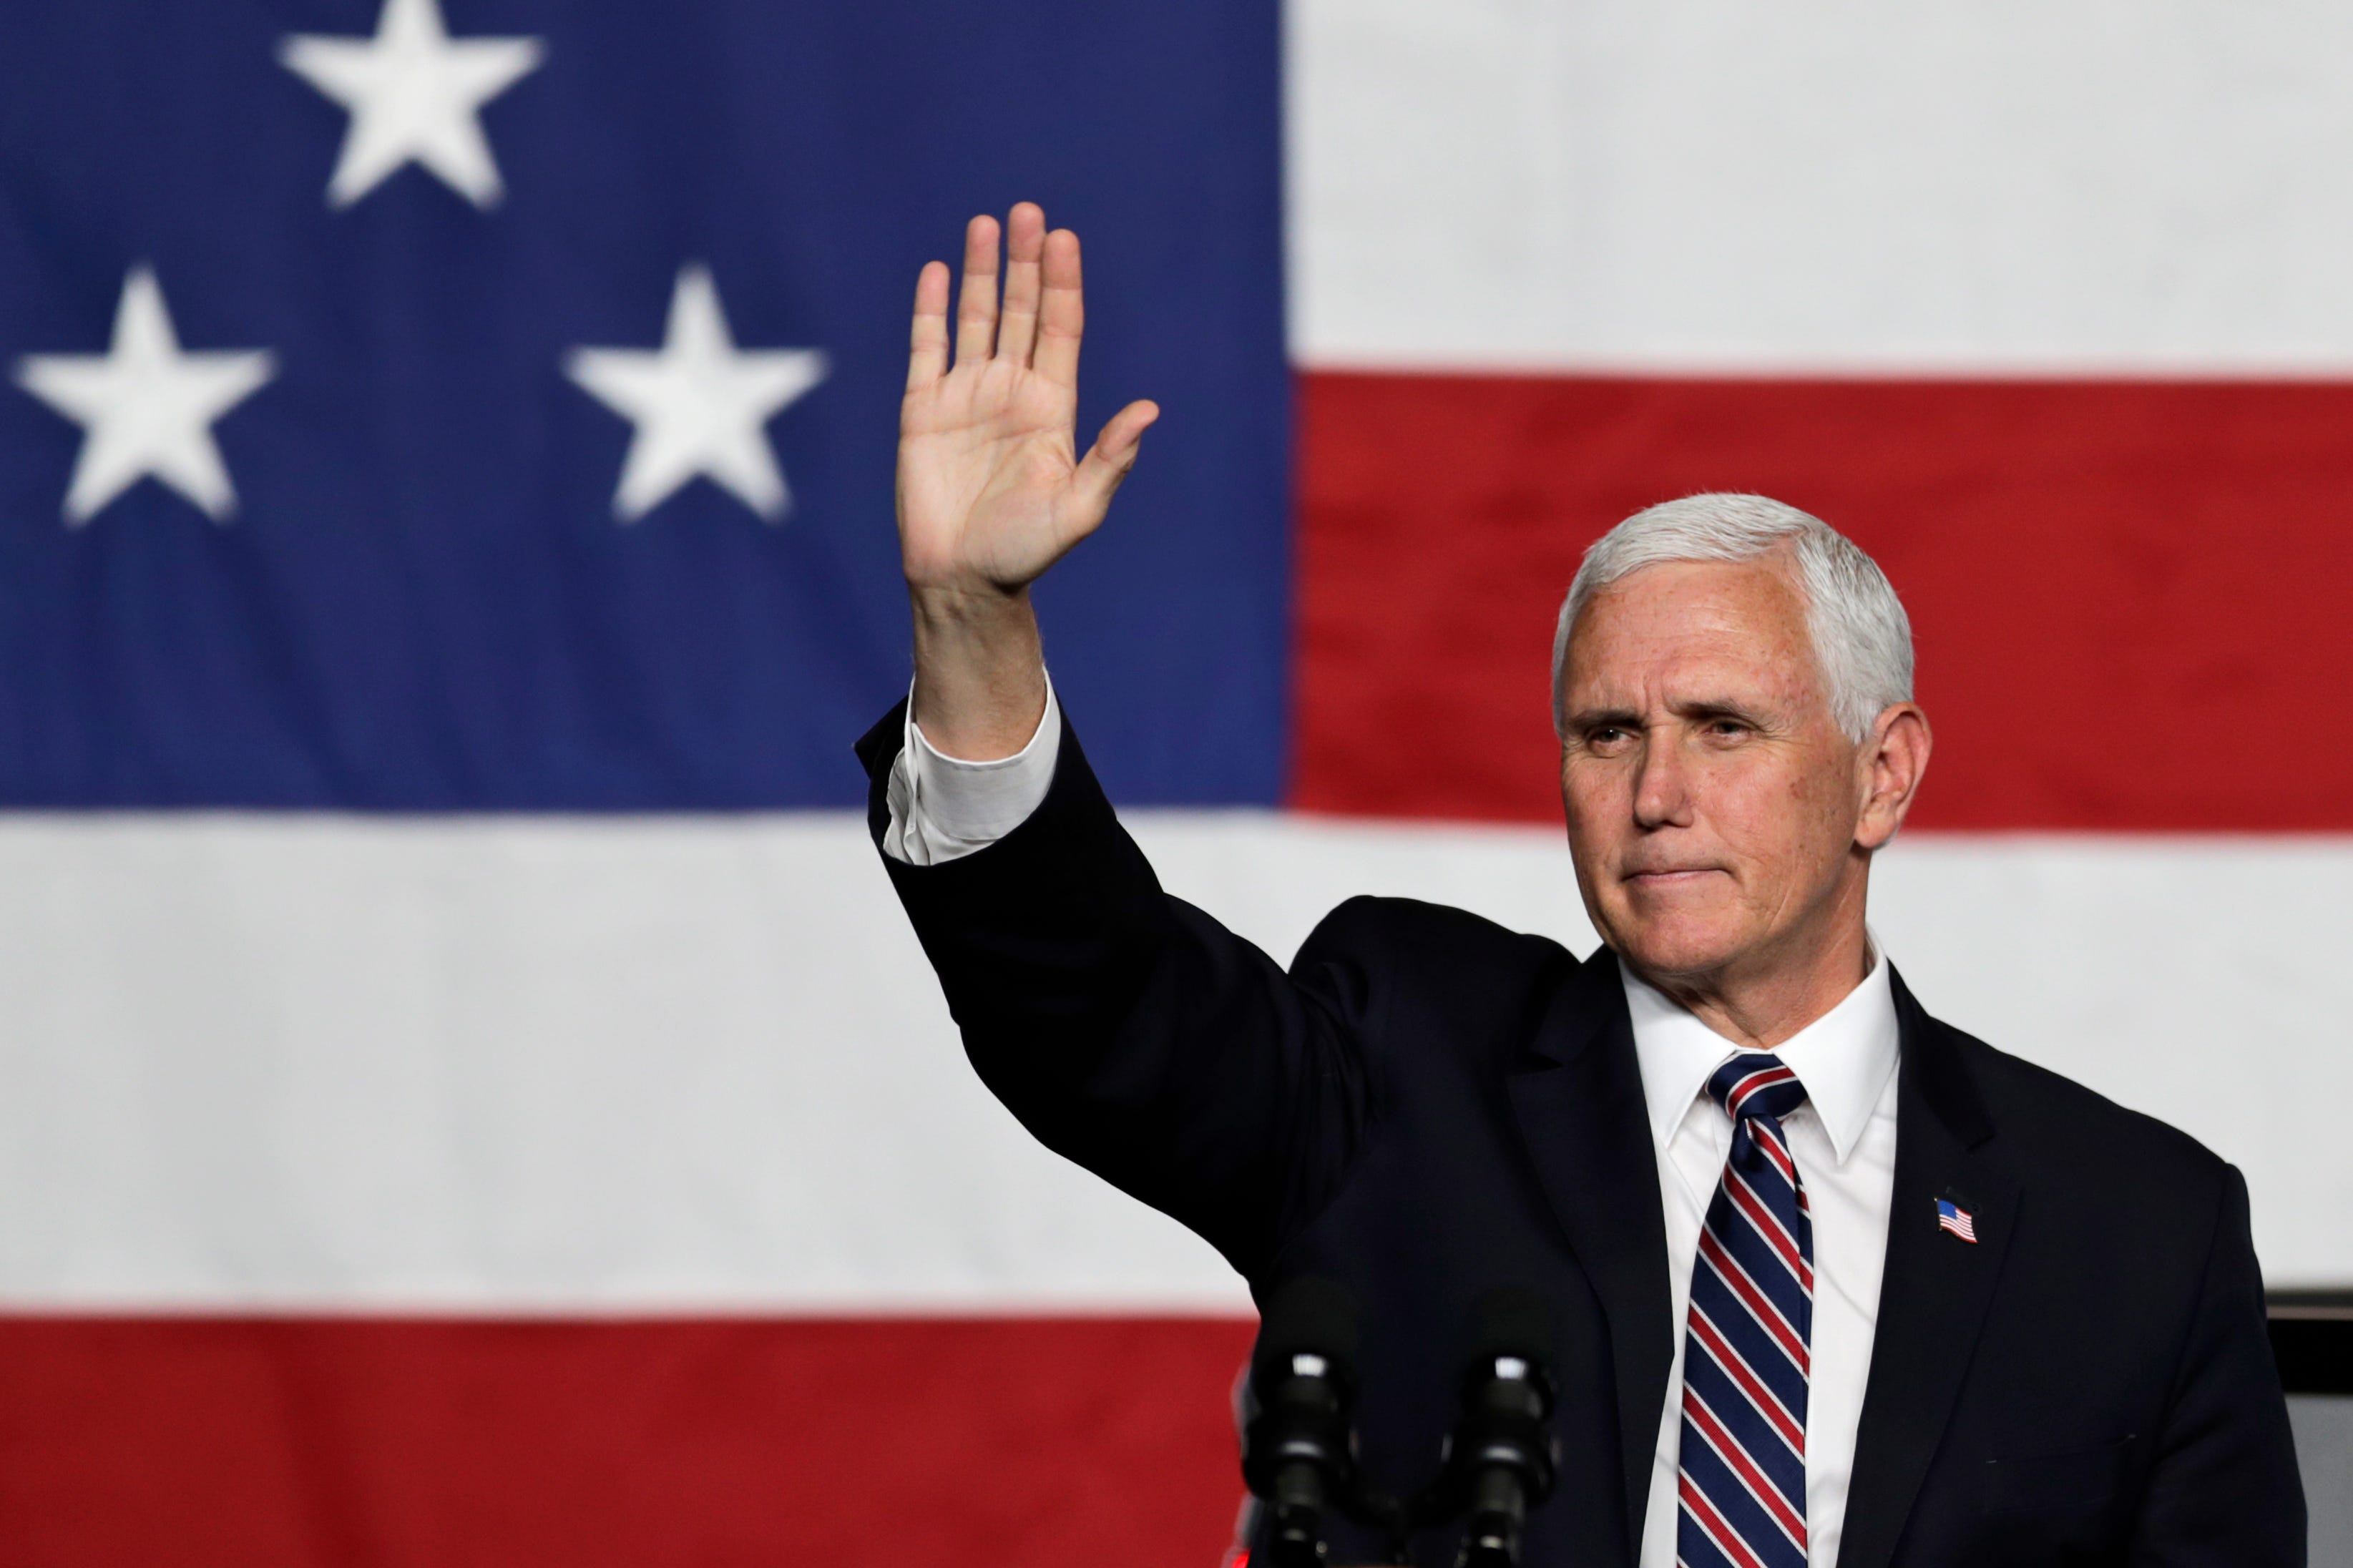 Vice President Mike Pence waves to supporters after speaking at the launch of the electric Endurance pickup truck at Lordstown Motors Corporation.